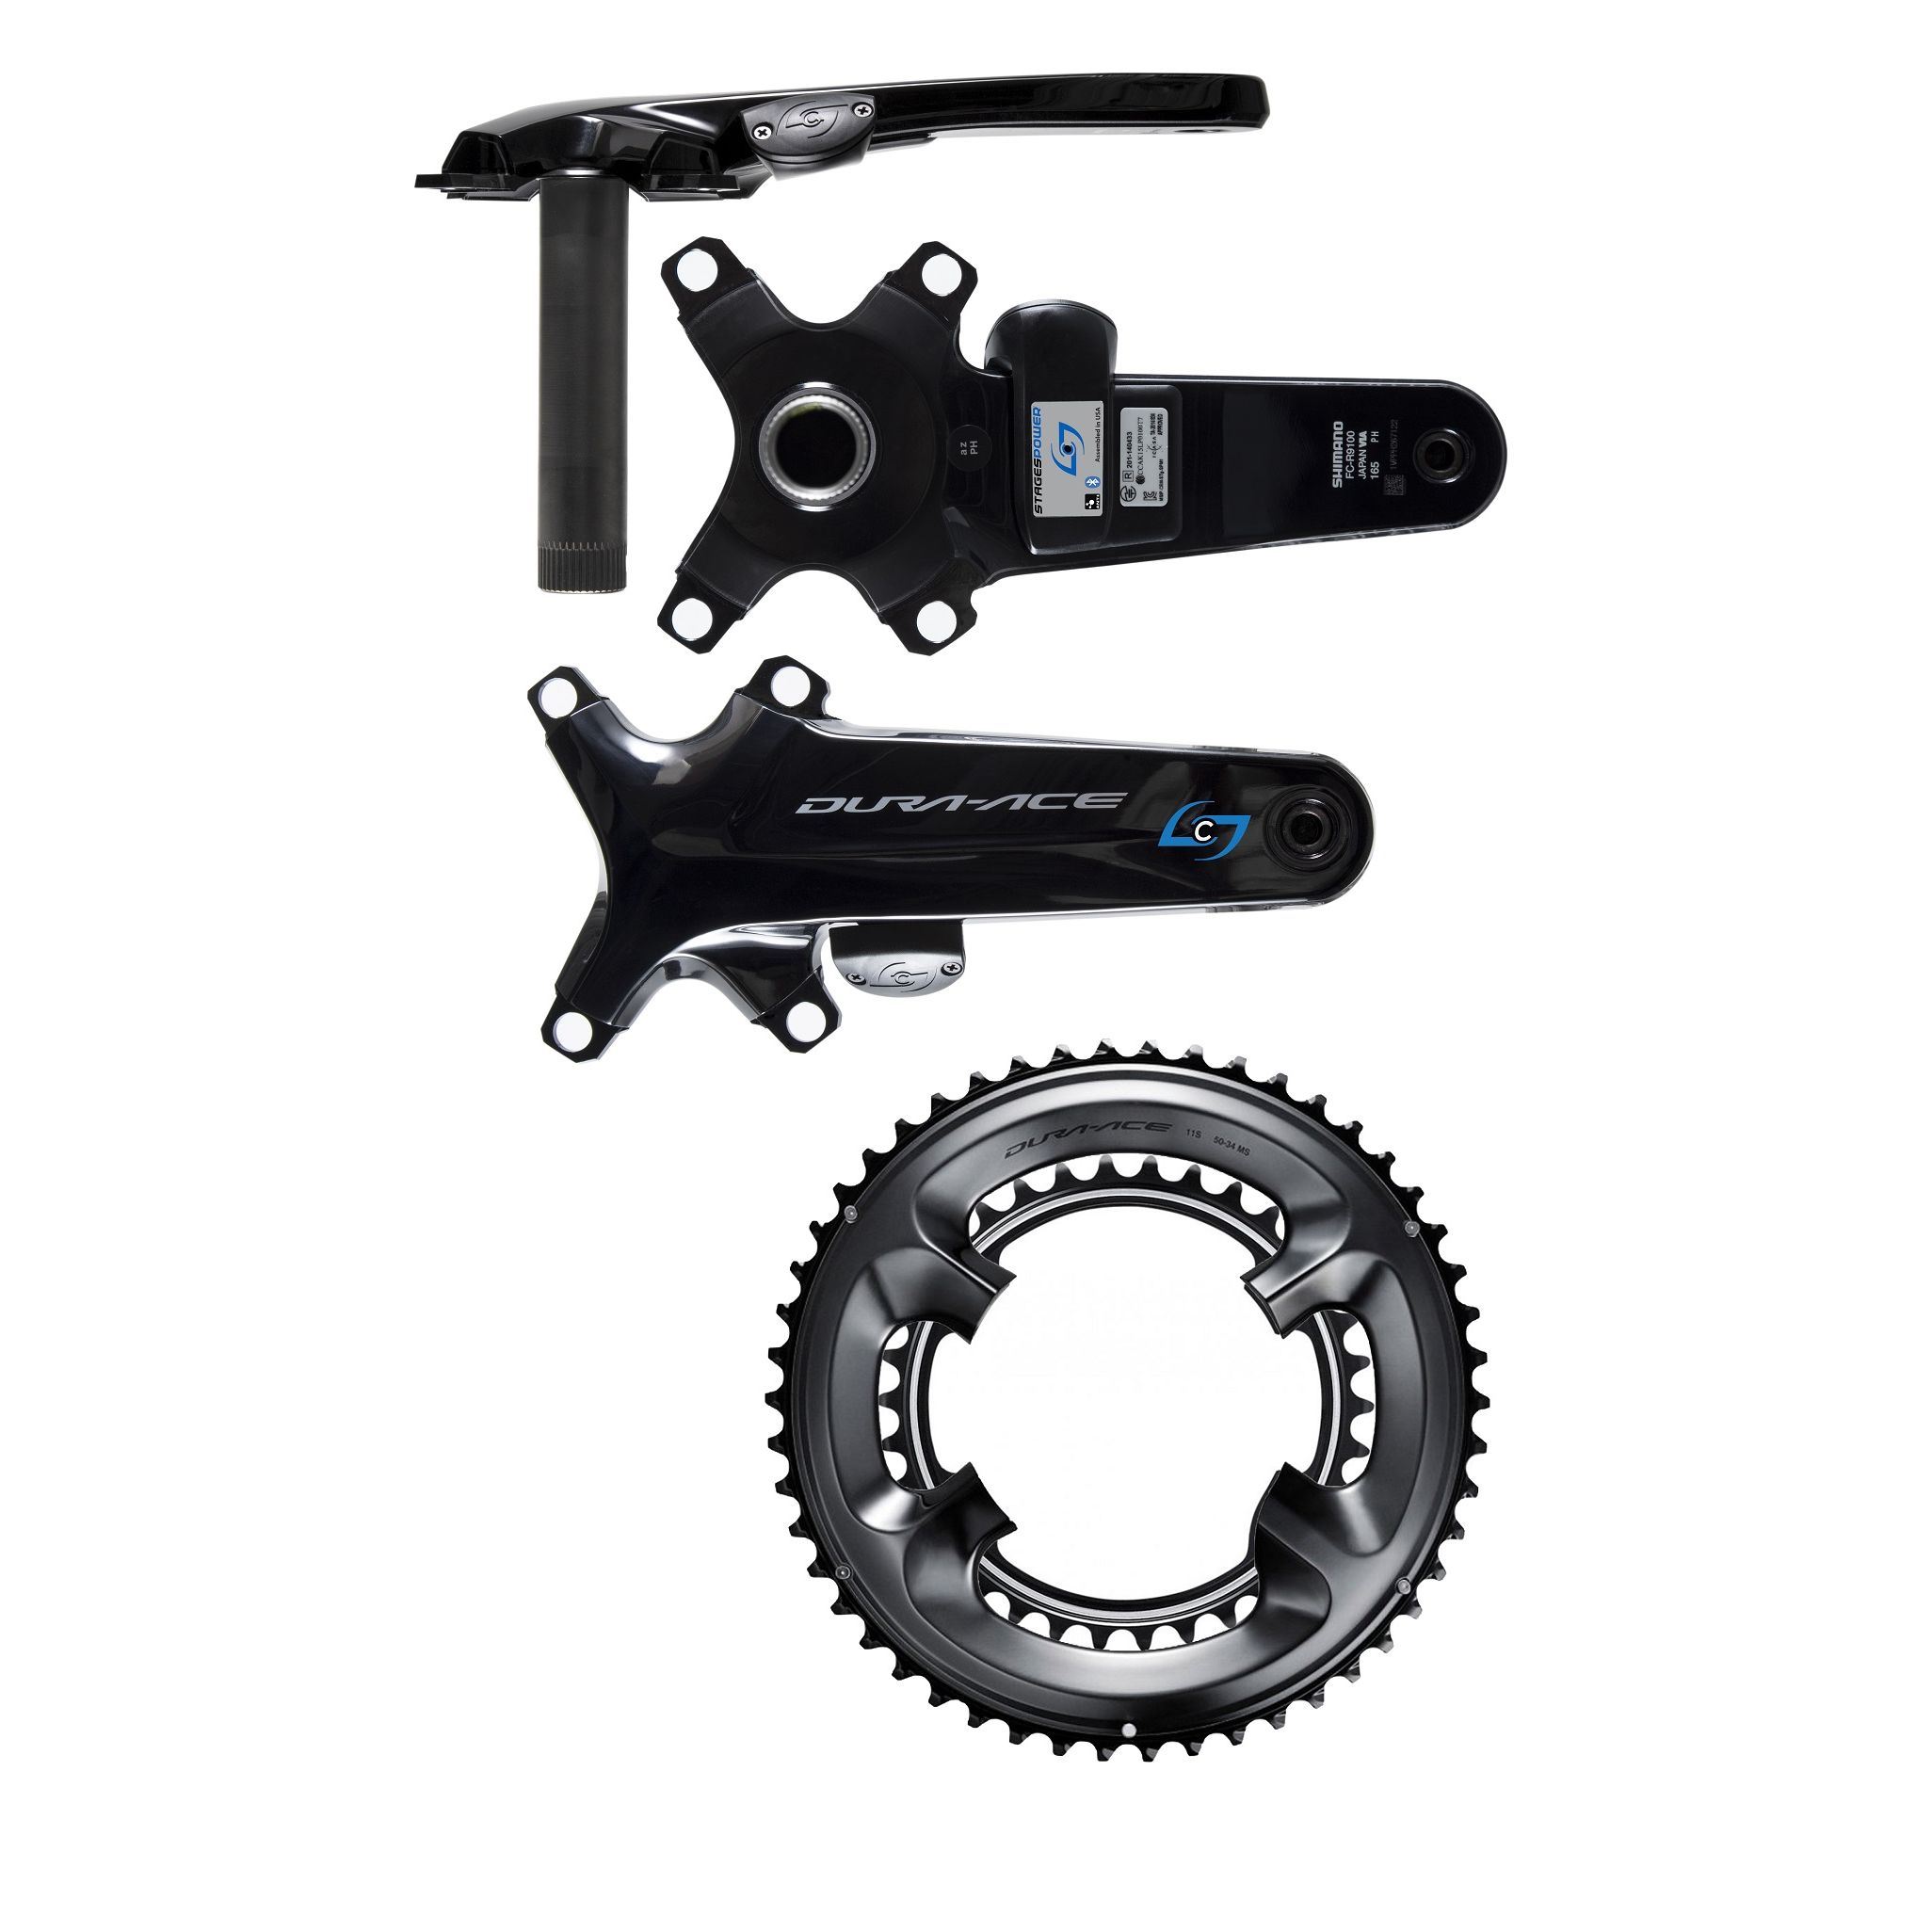 GEN 3 STAGES POWER R | Shimano DURA-ACE 9100 SINGLE DRIVESIDE POWER METER  WITH CHAINRINGS